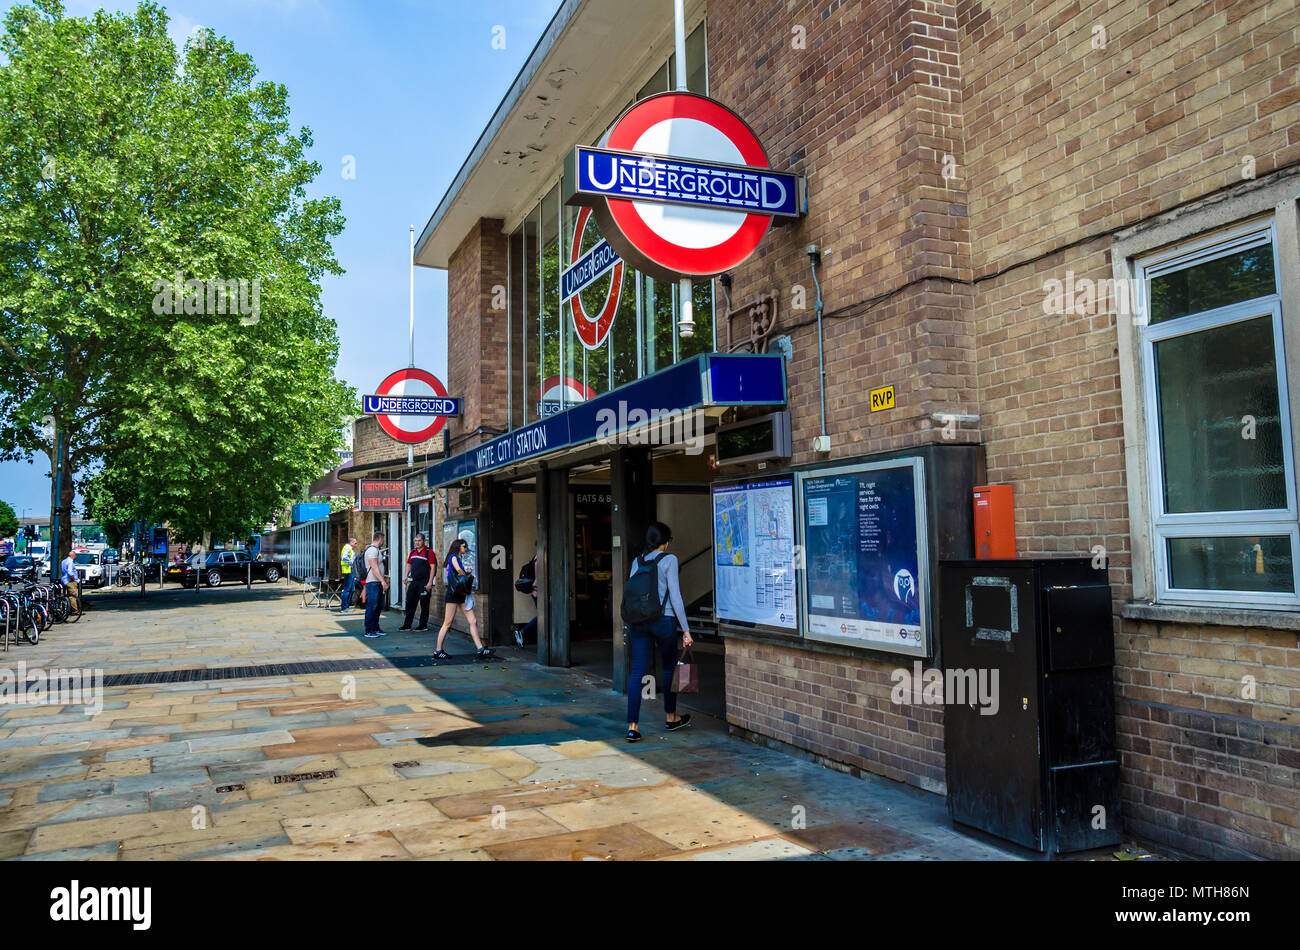 A view of the front of White City London Underground Station as seen from Wood Lane. Stock Photo